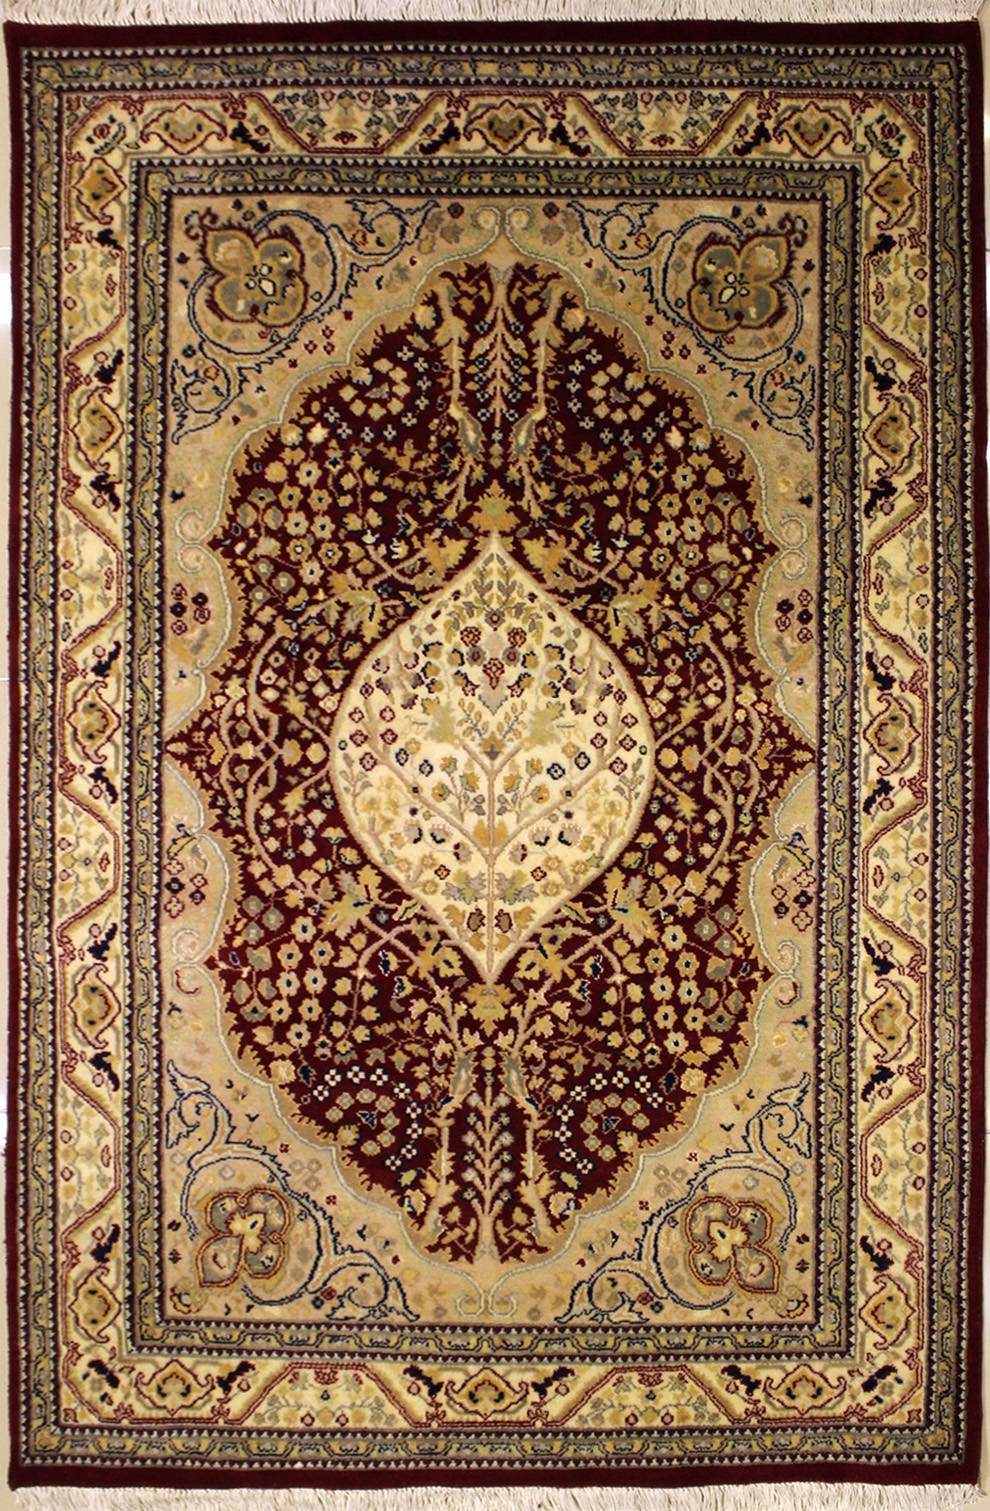 a 4x6 Rectangular Double Knot Rug RugsTC 4'0 x 6'4 Pak Persian Area Rug with Silk & Wool Pile Floral Design 100% Original Hand-Knotted in Gold,White,Green Colors 